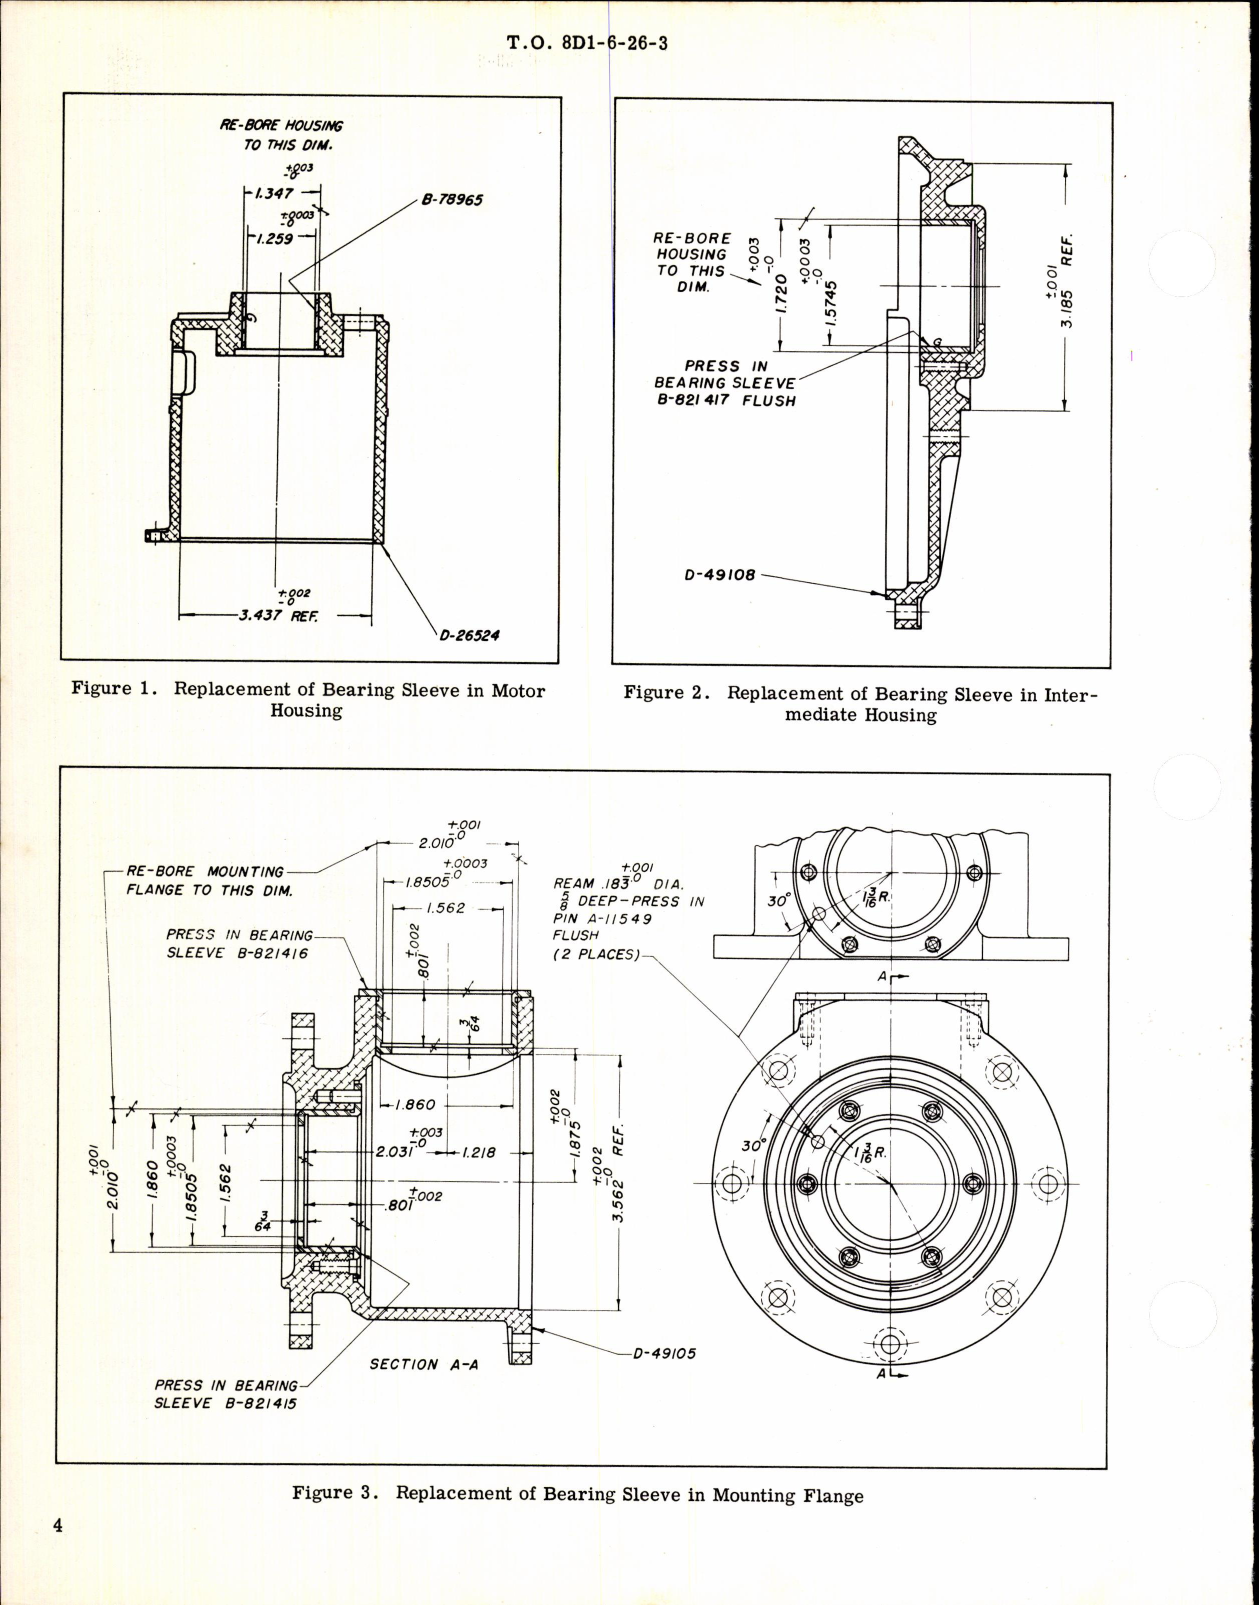 Sample page 4 from AirCorps Library document: Overhaul Instructions with Parts Breakdown for Retracting Motor Part No 1227-1-B